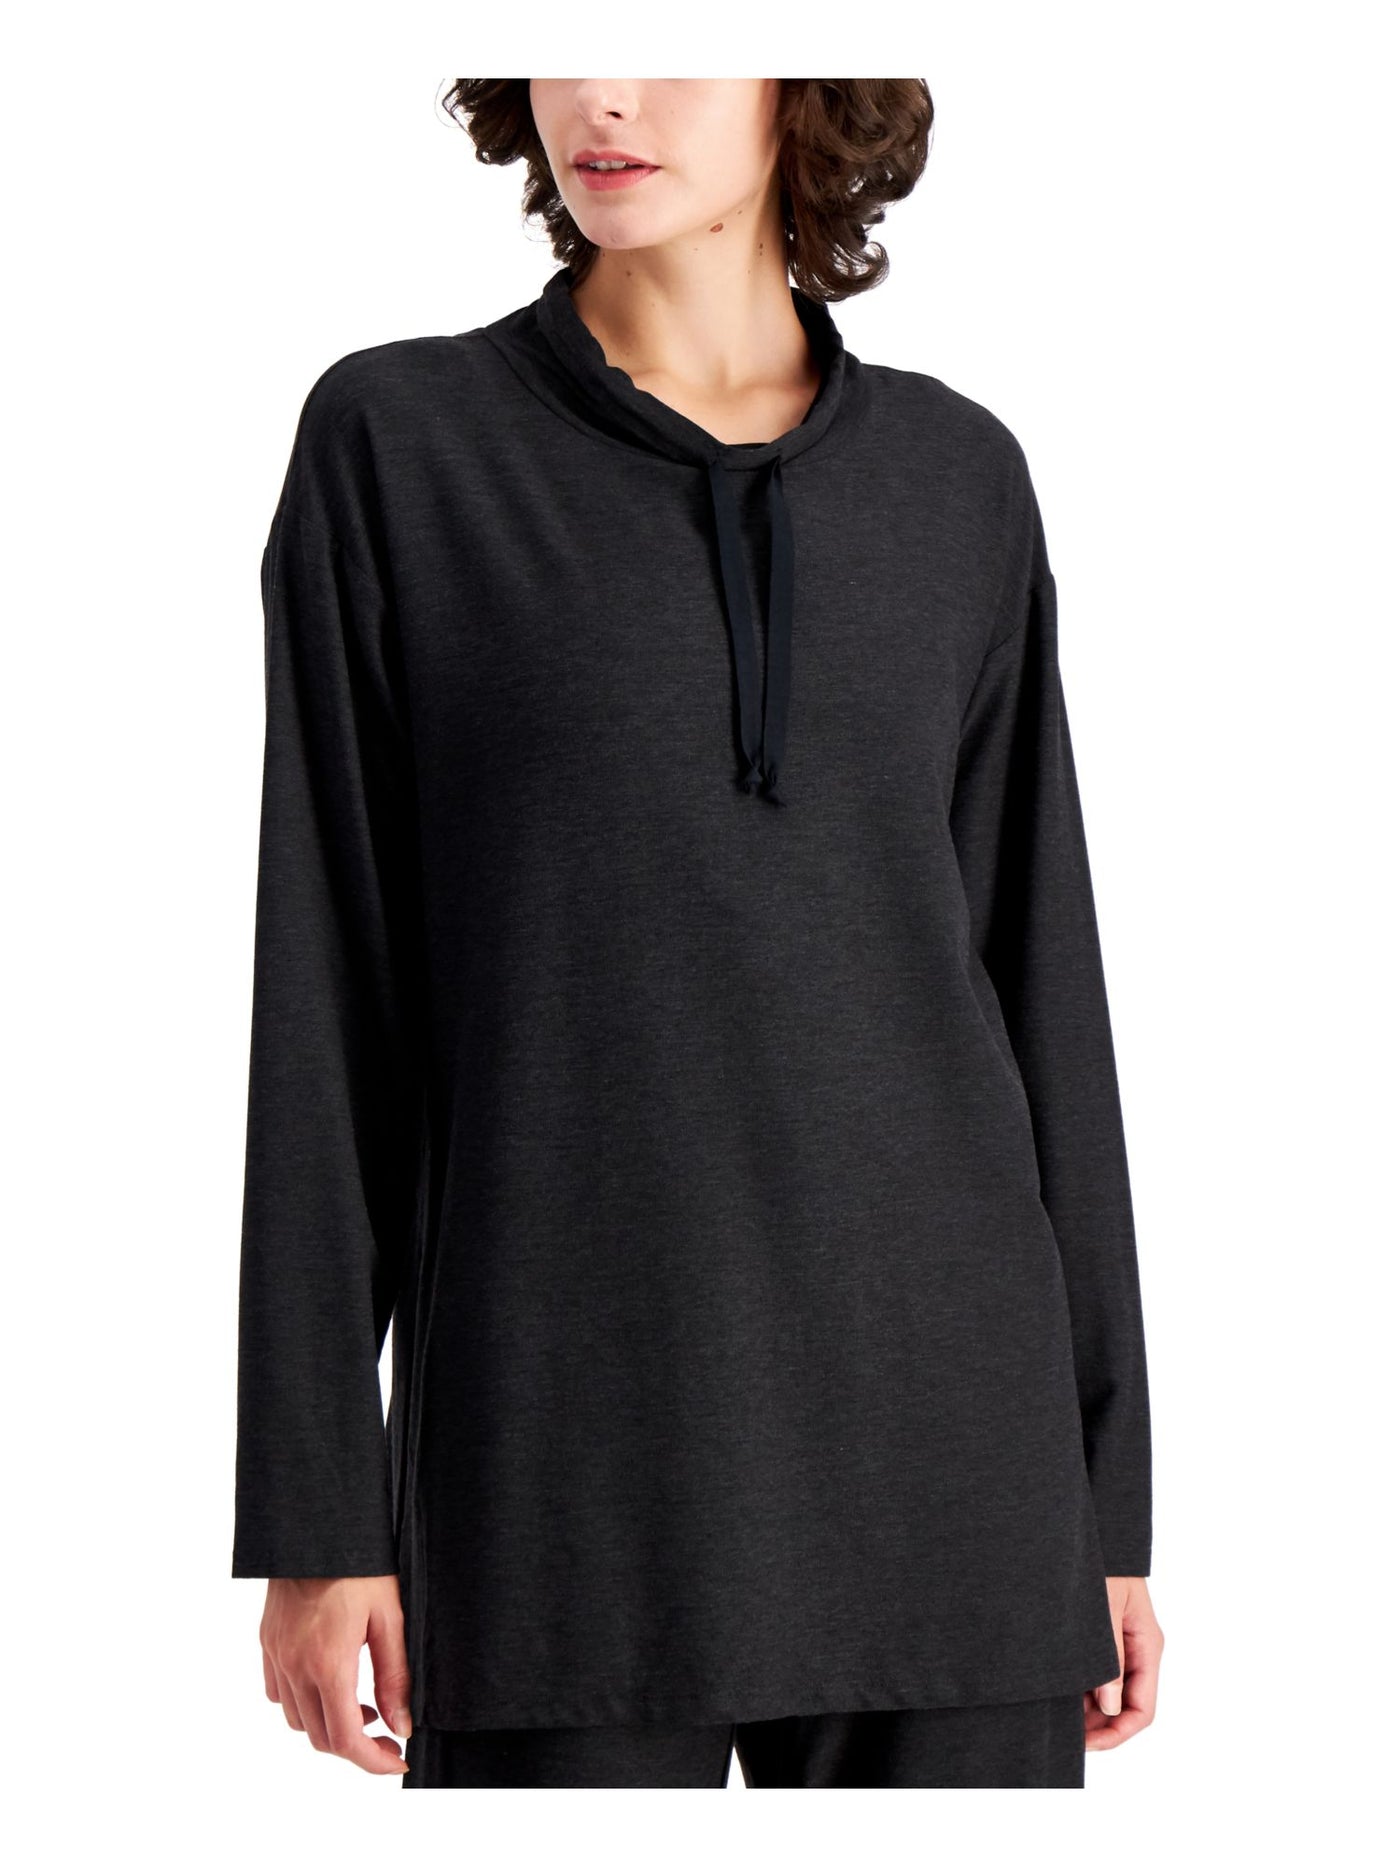 EILEEN FISHER Womens Gray Stretch Heather Long Sleeve Round Neck Tunic Top S